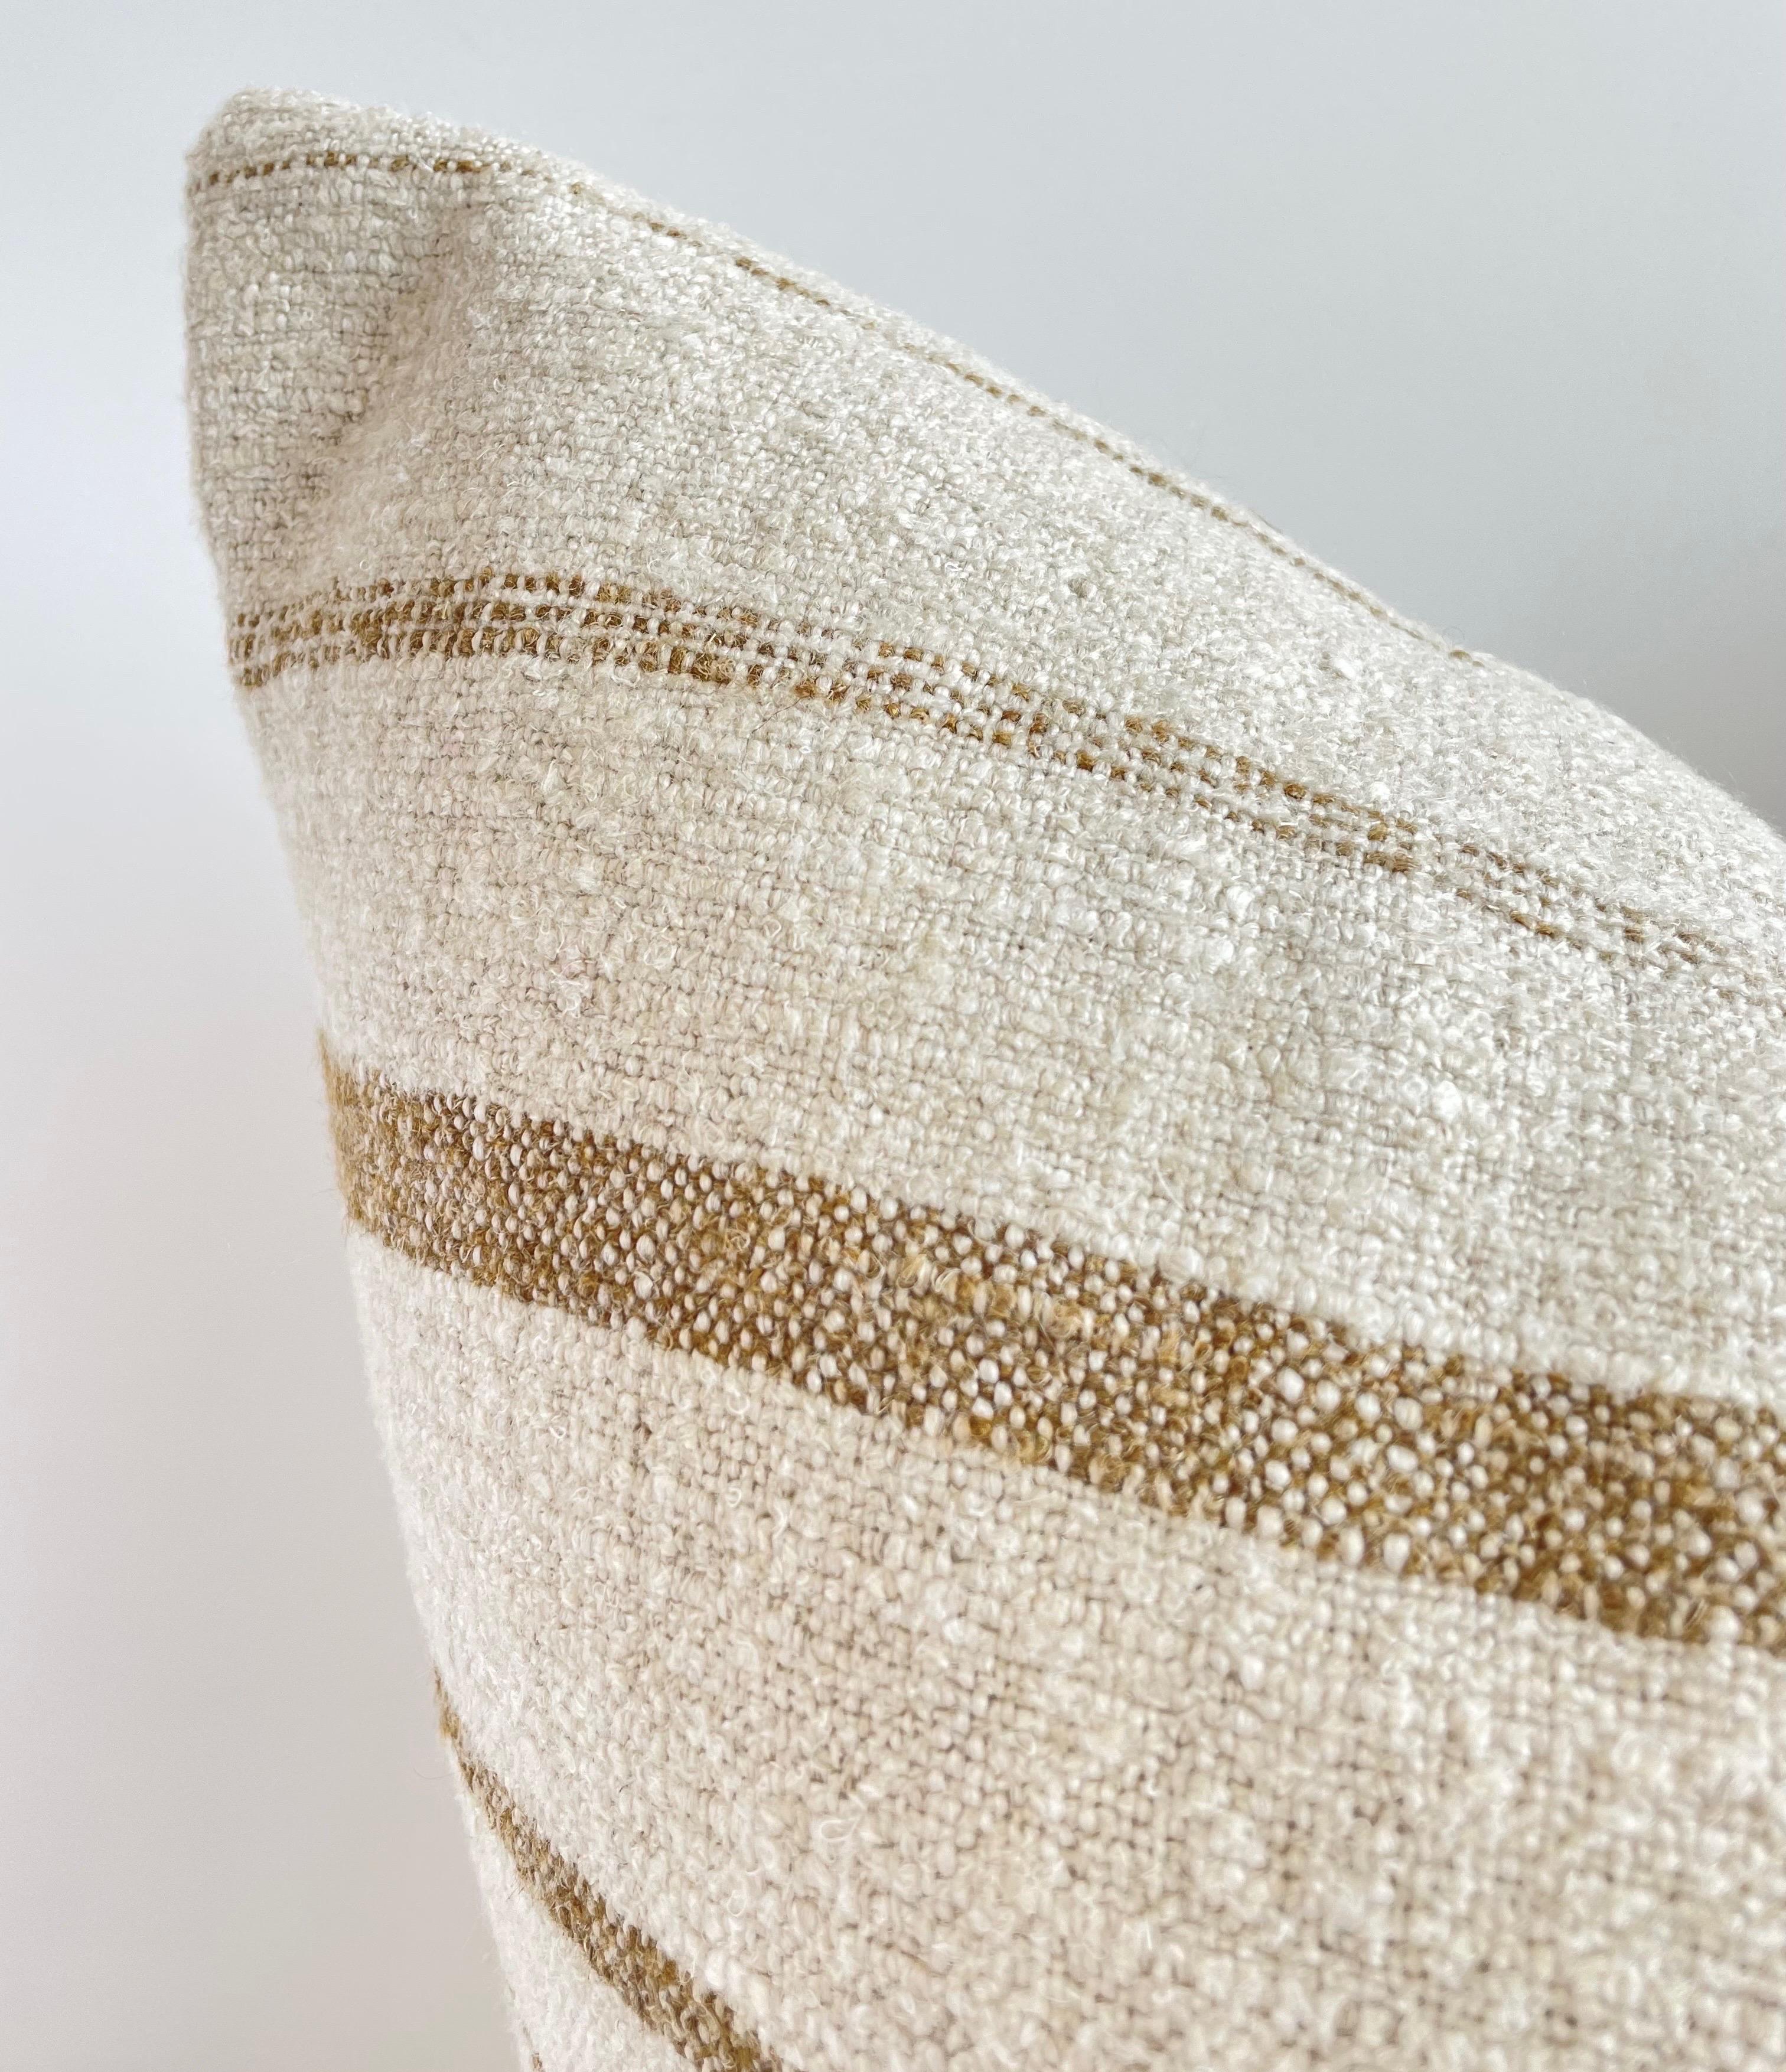 Woven in Belgium using traditional weaving techniques, Bloom Home Inc. Natalie features a Belgian Linen warp and alternating Belgian Linen/Mixed Fiber weft. This pillow feature a horizontal non repeating stripe. Includes insert. 

Color: Natural and